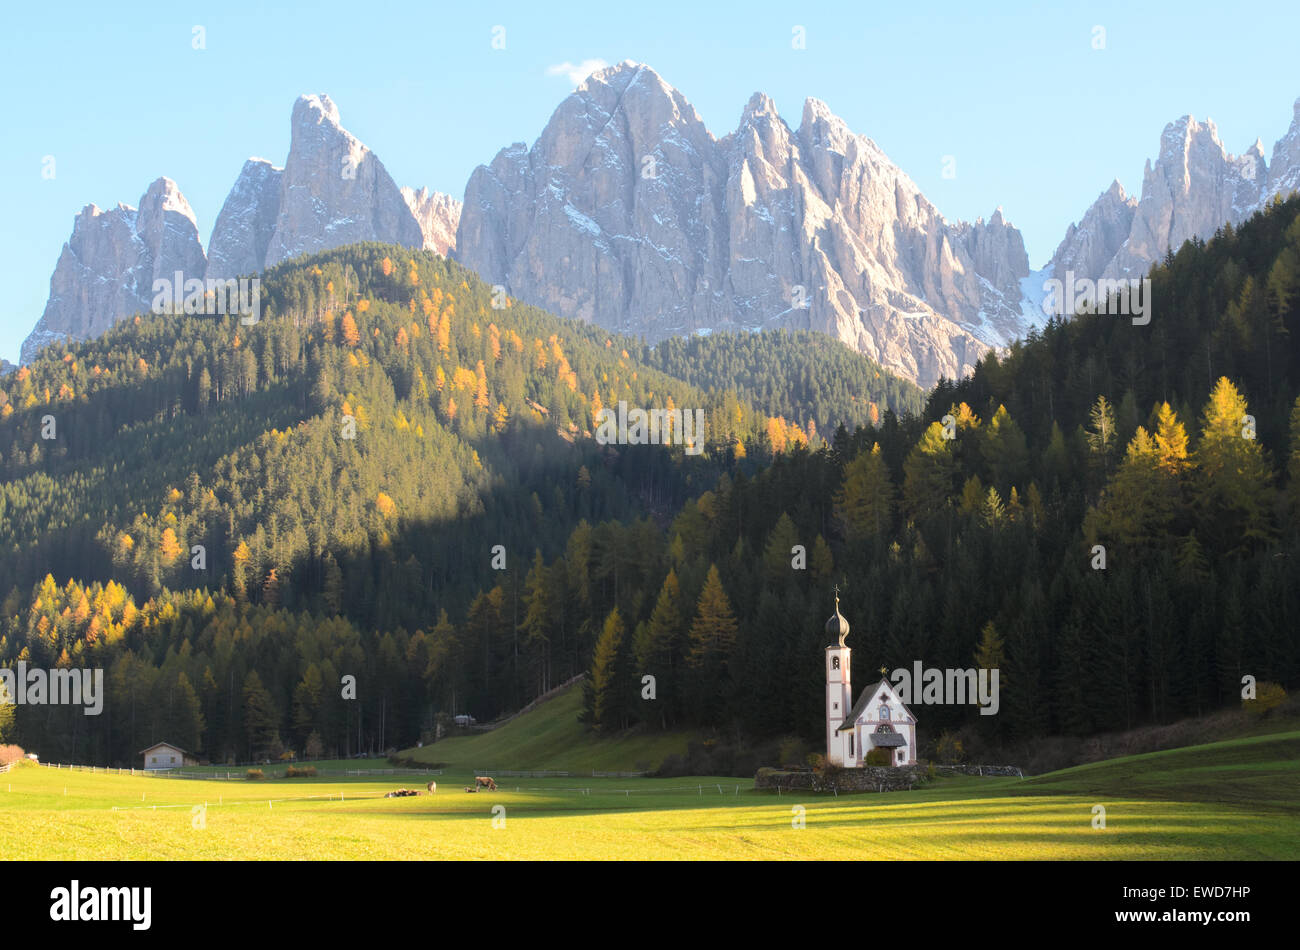 The church of San Giovanni in Ranui (Sankt Johann) in front of the Geisler or Odle dolomites mountain peaks in Santa Maddalena. Stock Photo